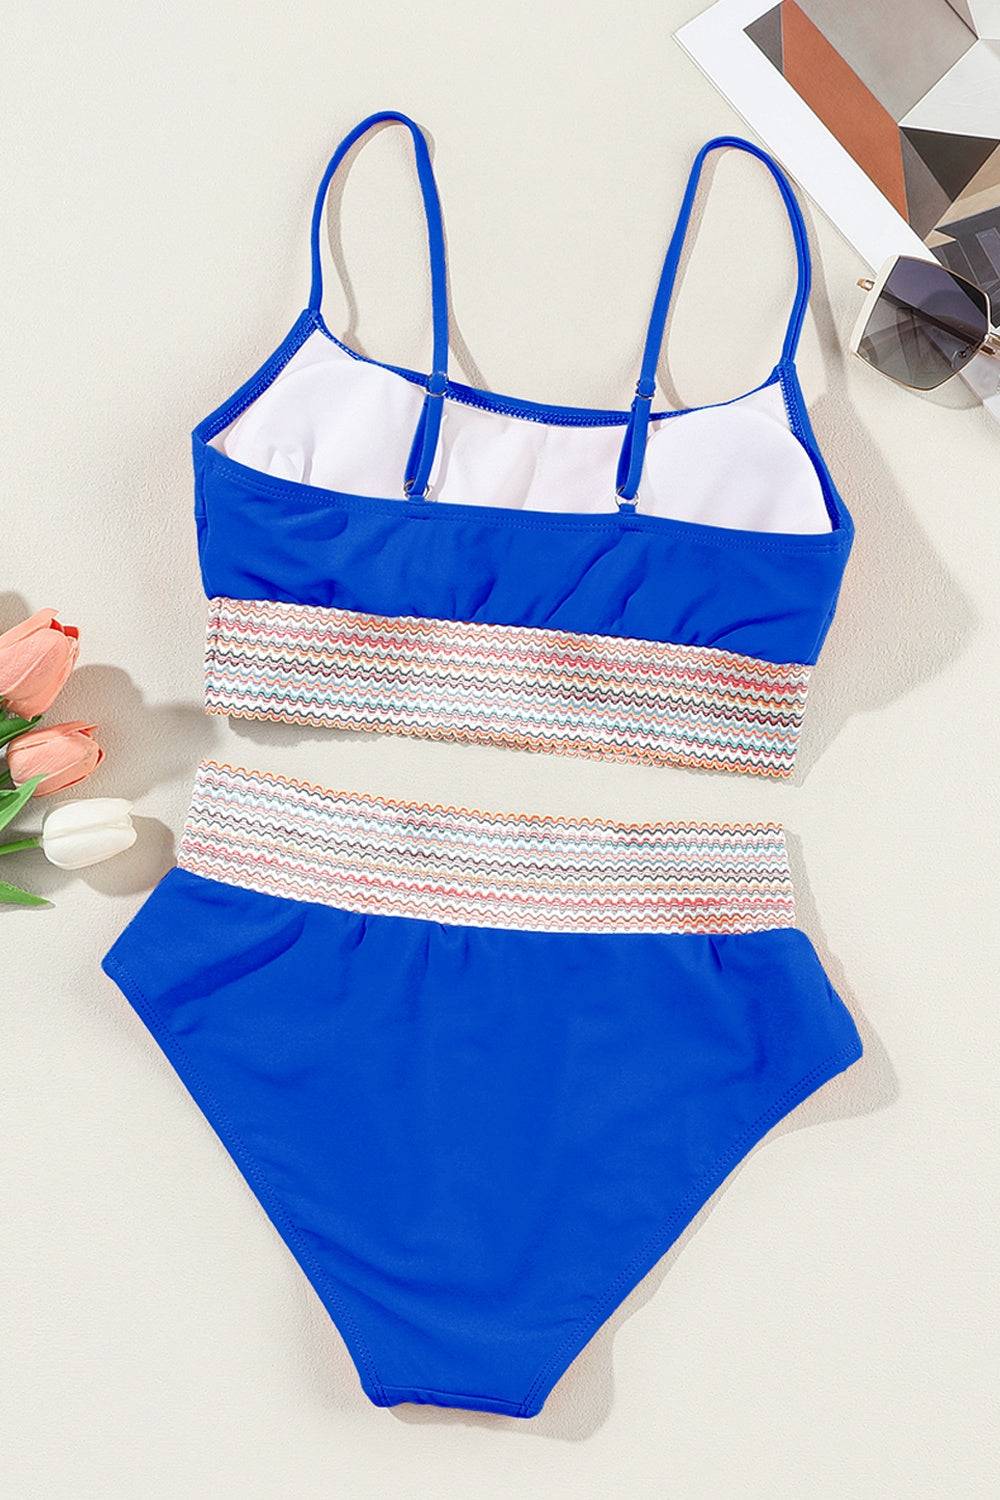 a blue and white one piece swimsuit next to a flower